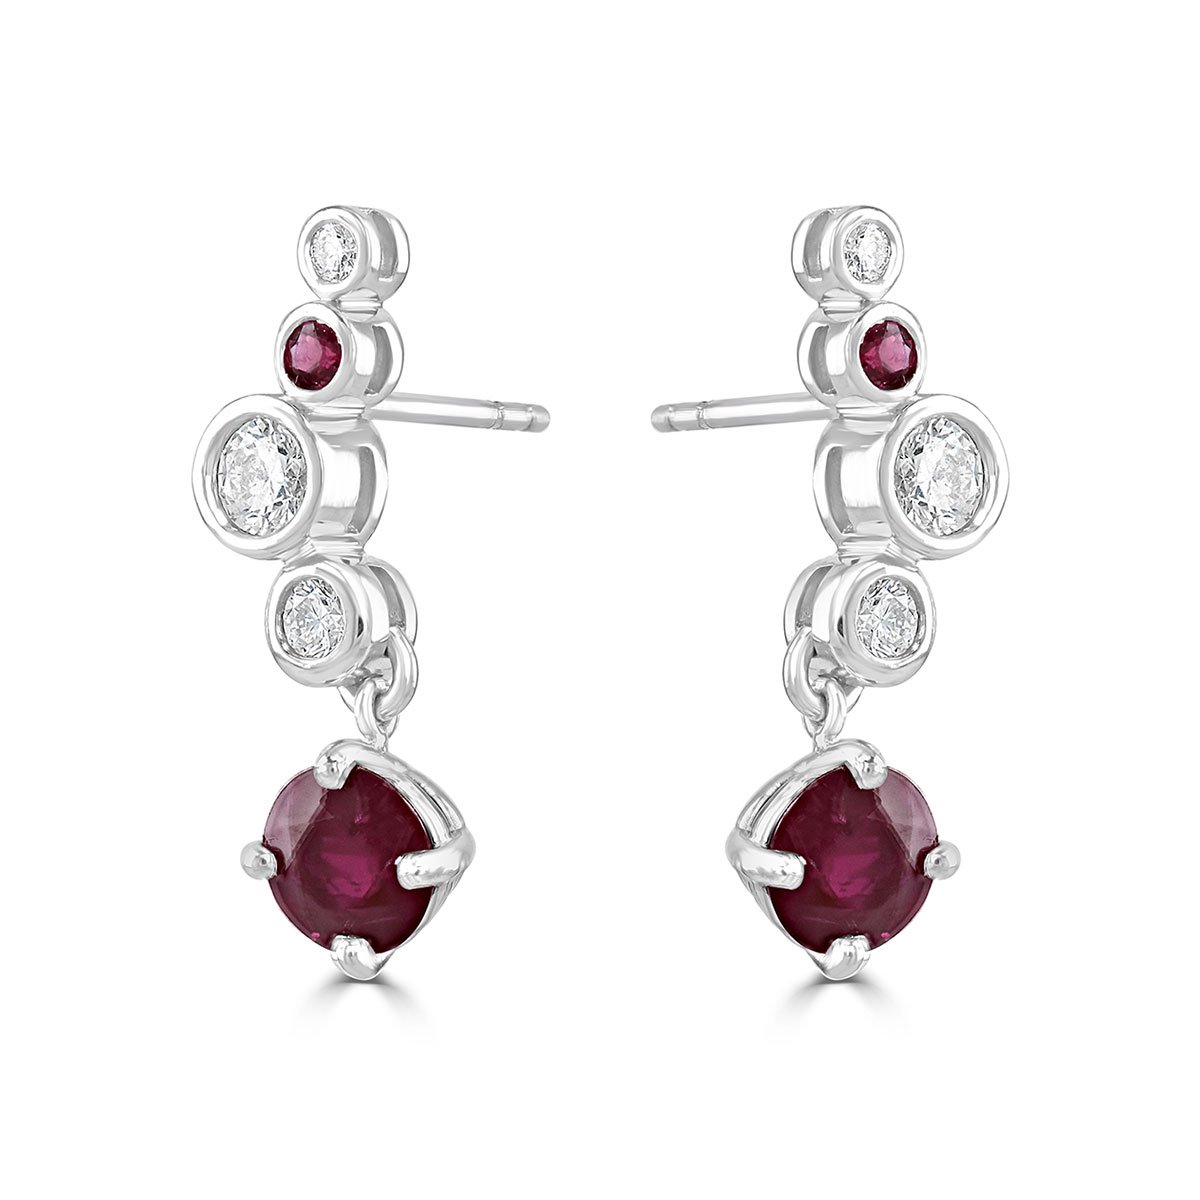 Platinum Round Cut Diamond and Ruby Earrings